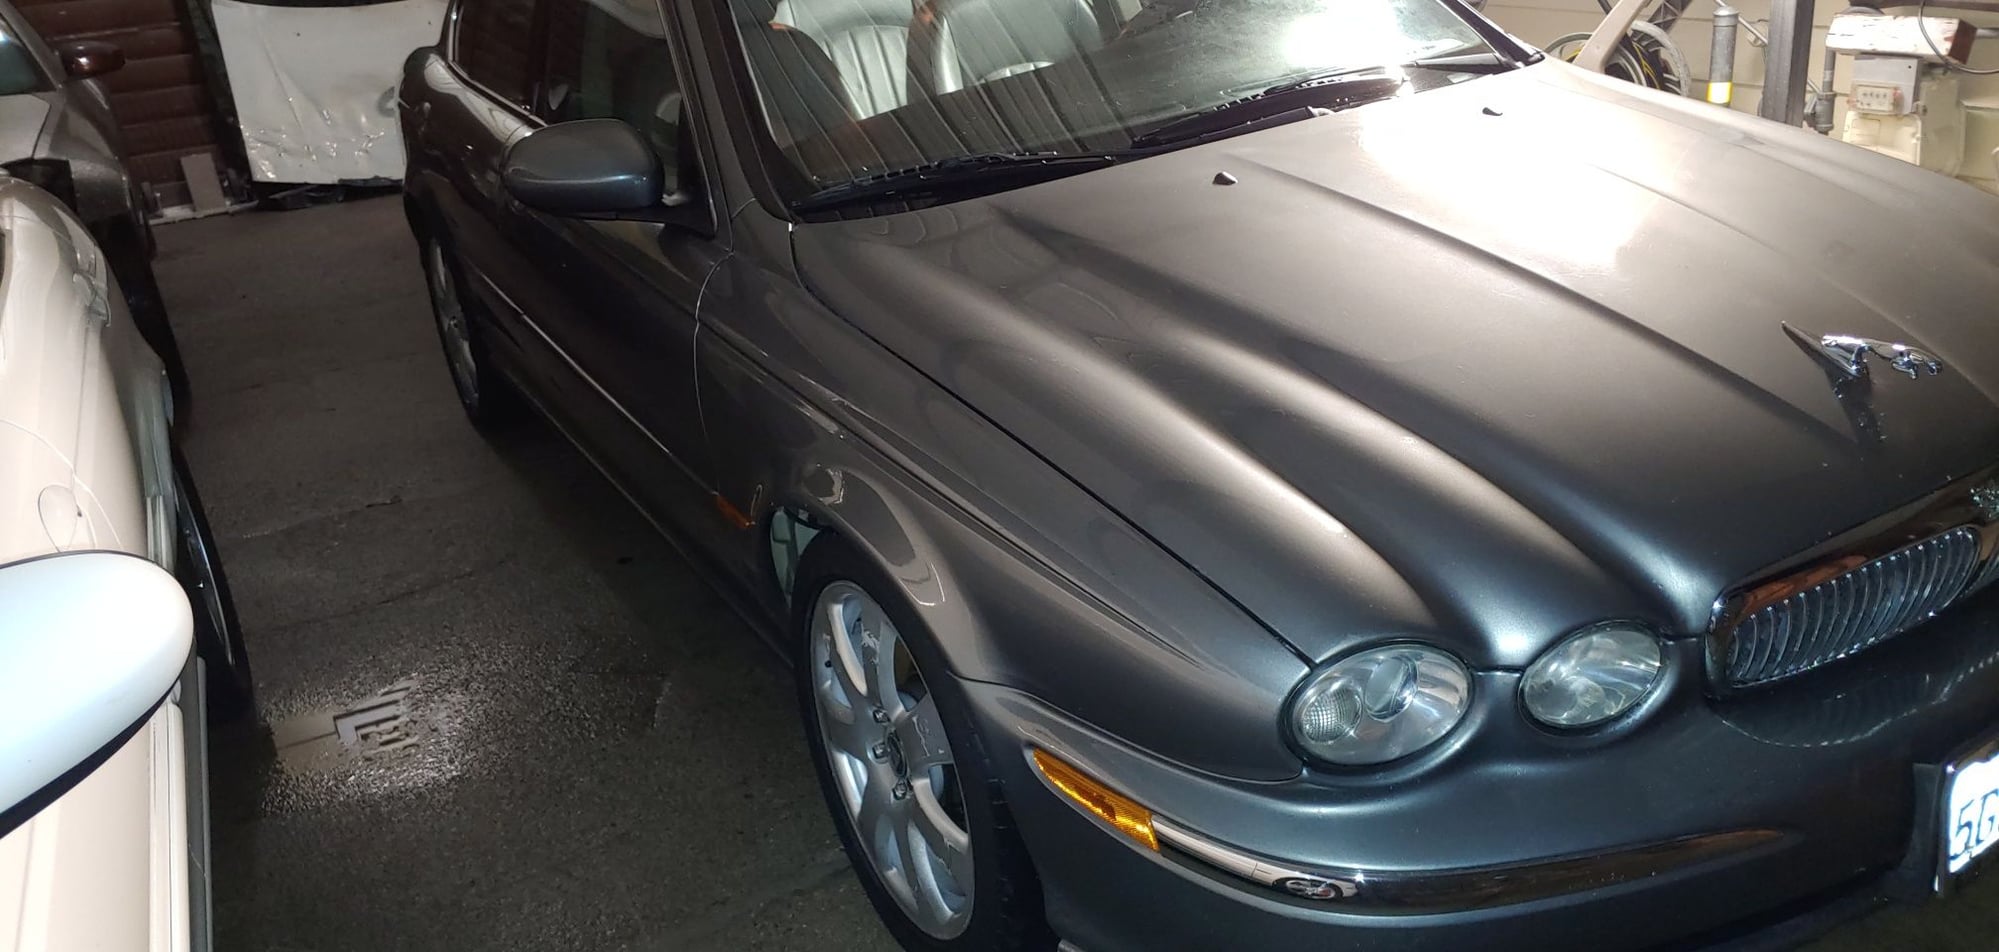 2004 Jaguar X-Type - Parting out '04 X Type 3.0 - Stockton, CA 95205, United States